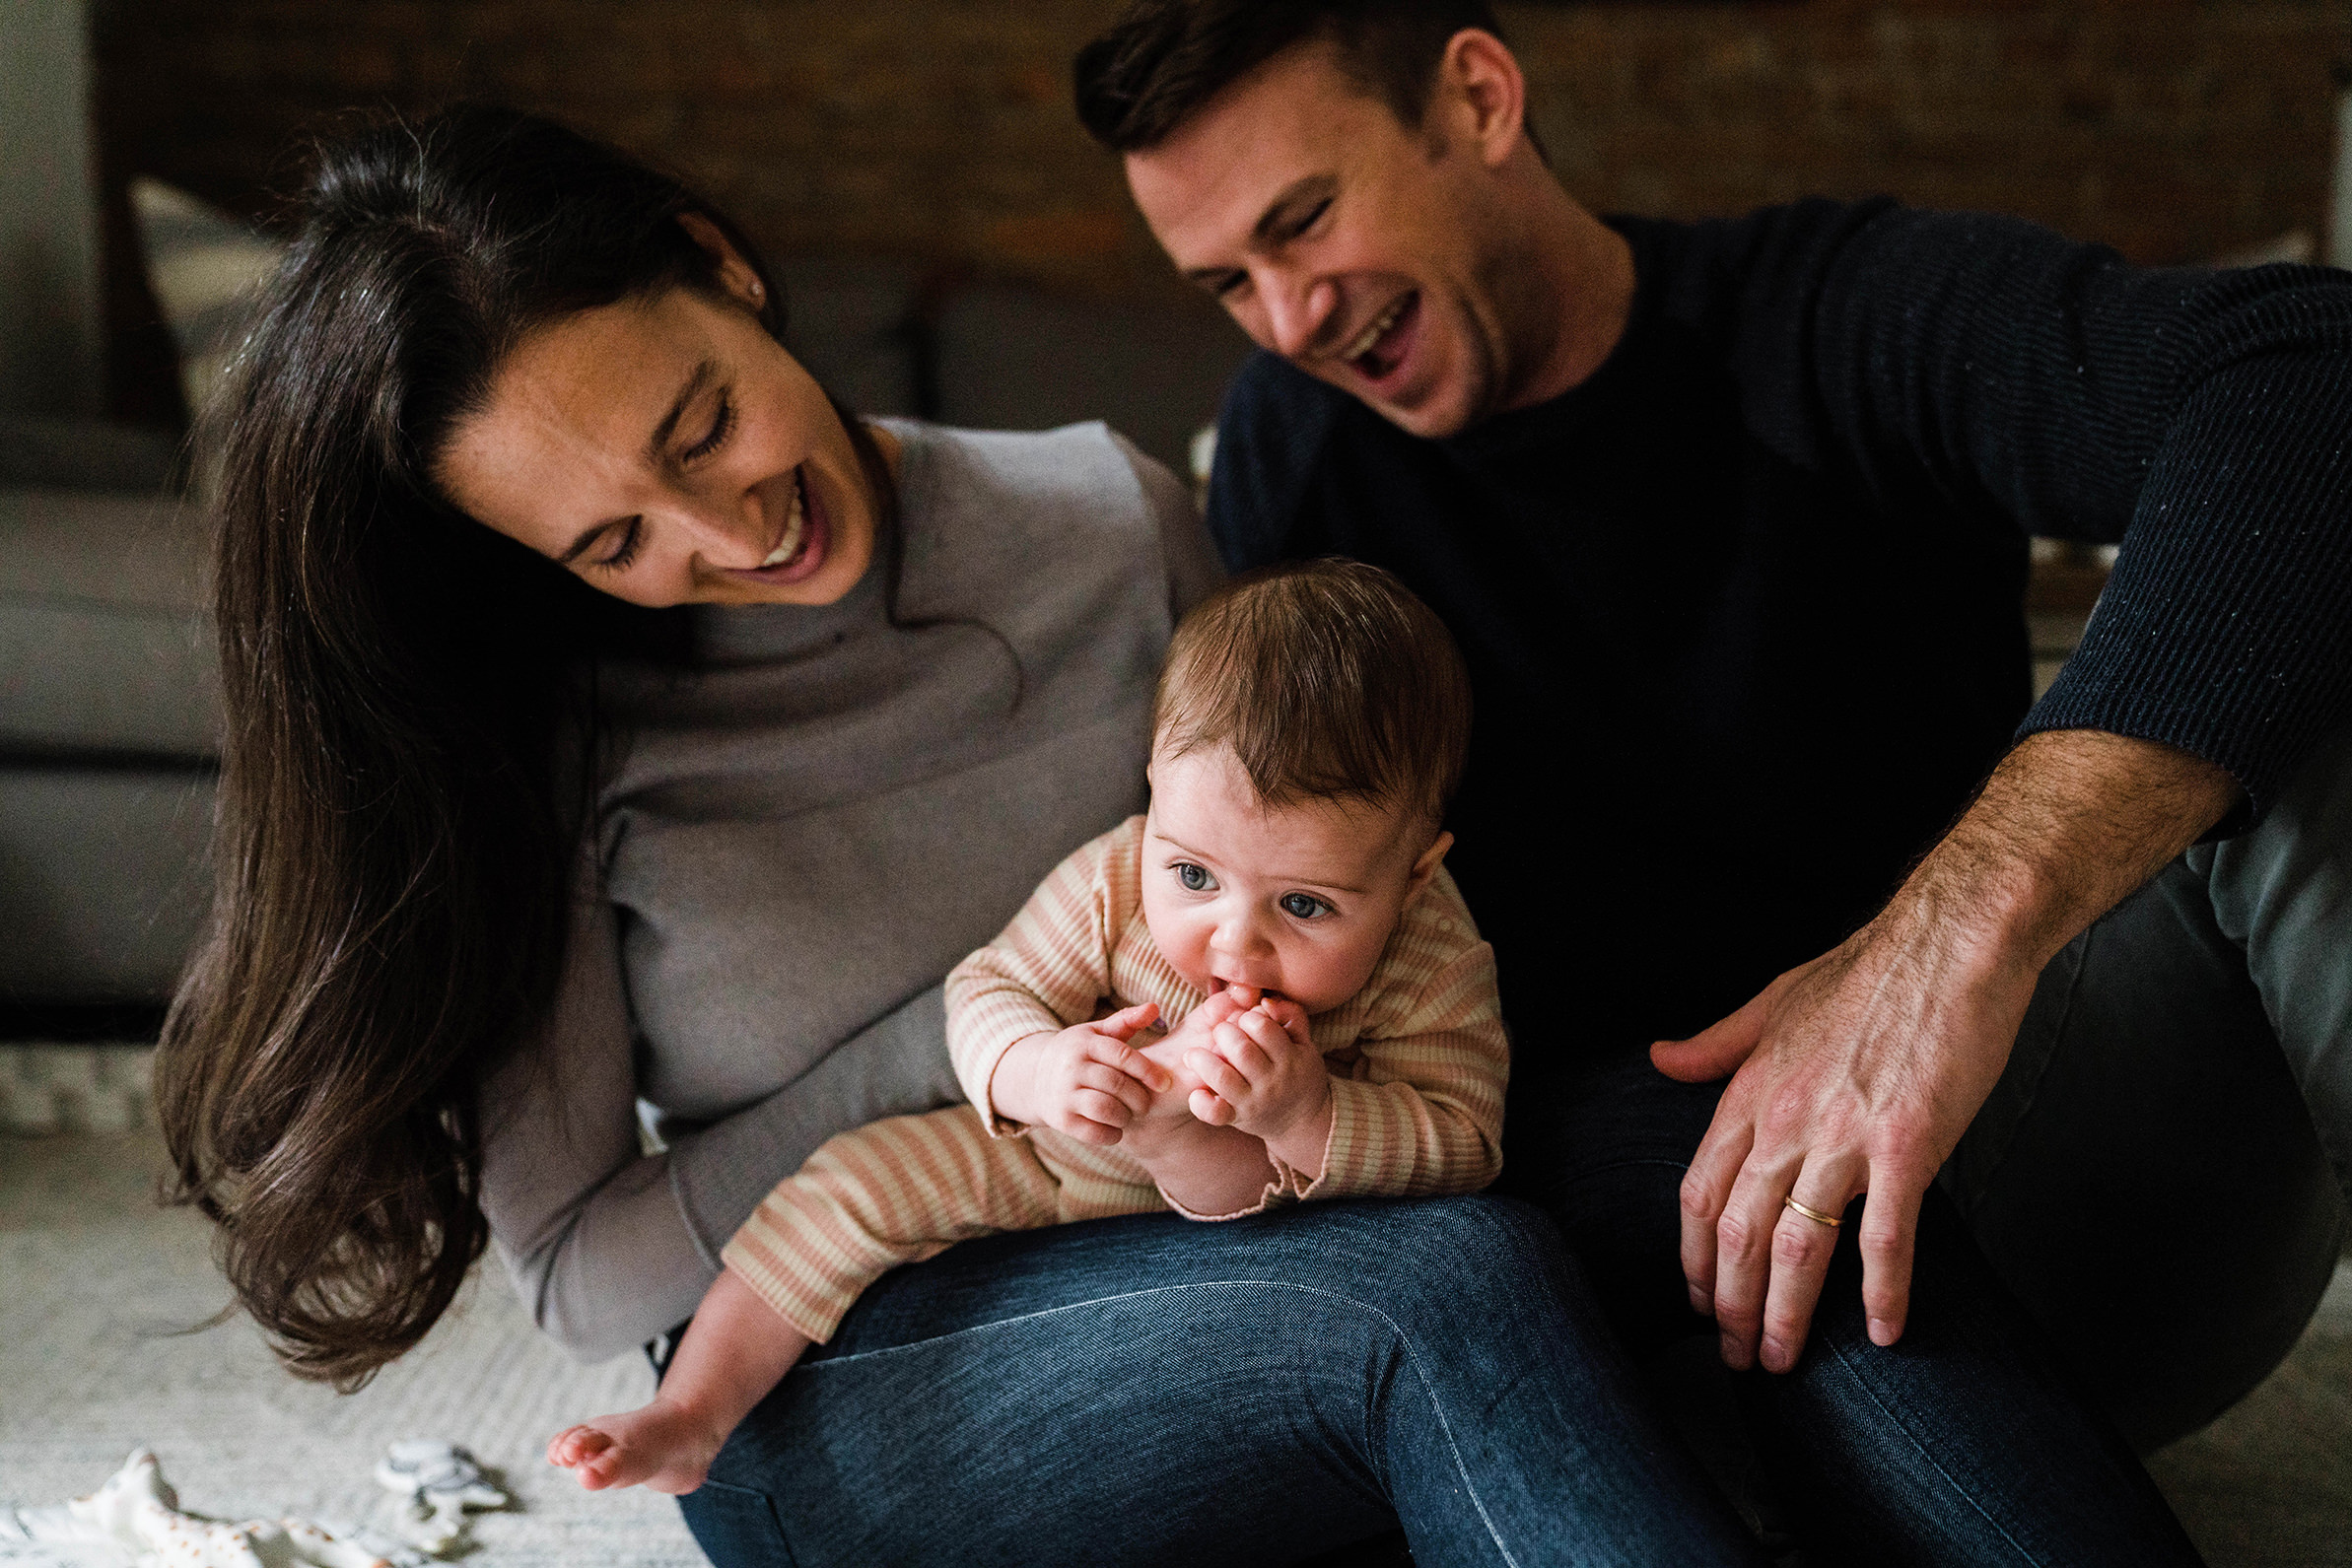 A documentary photograph of a parents laughing while their baby discovers her toes during an in home family session